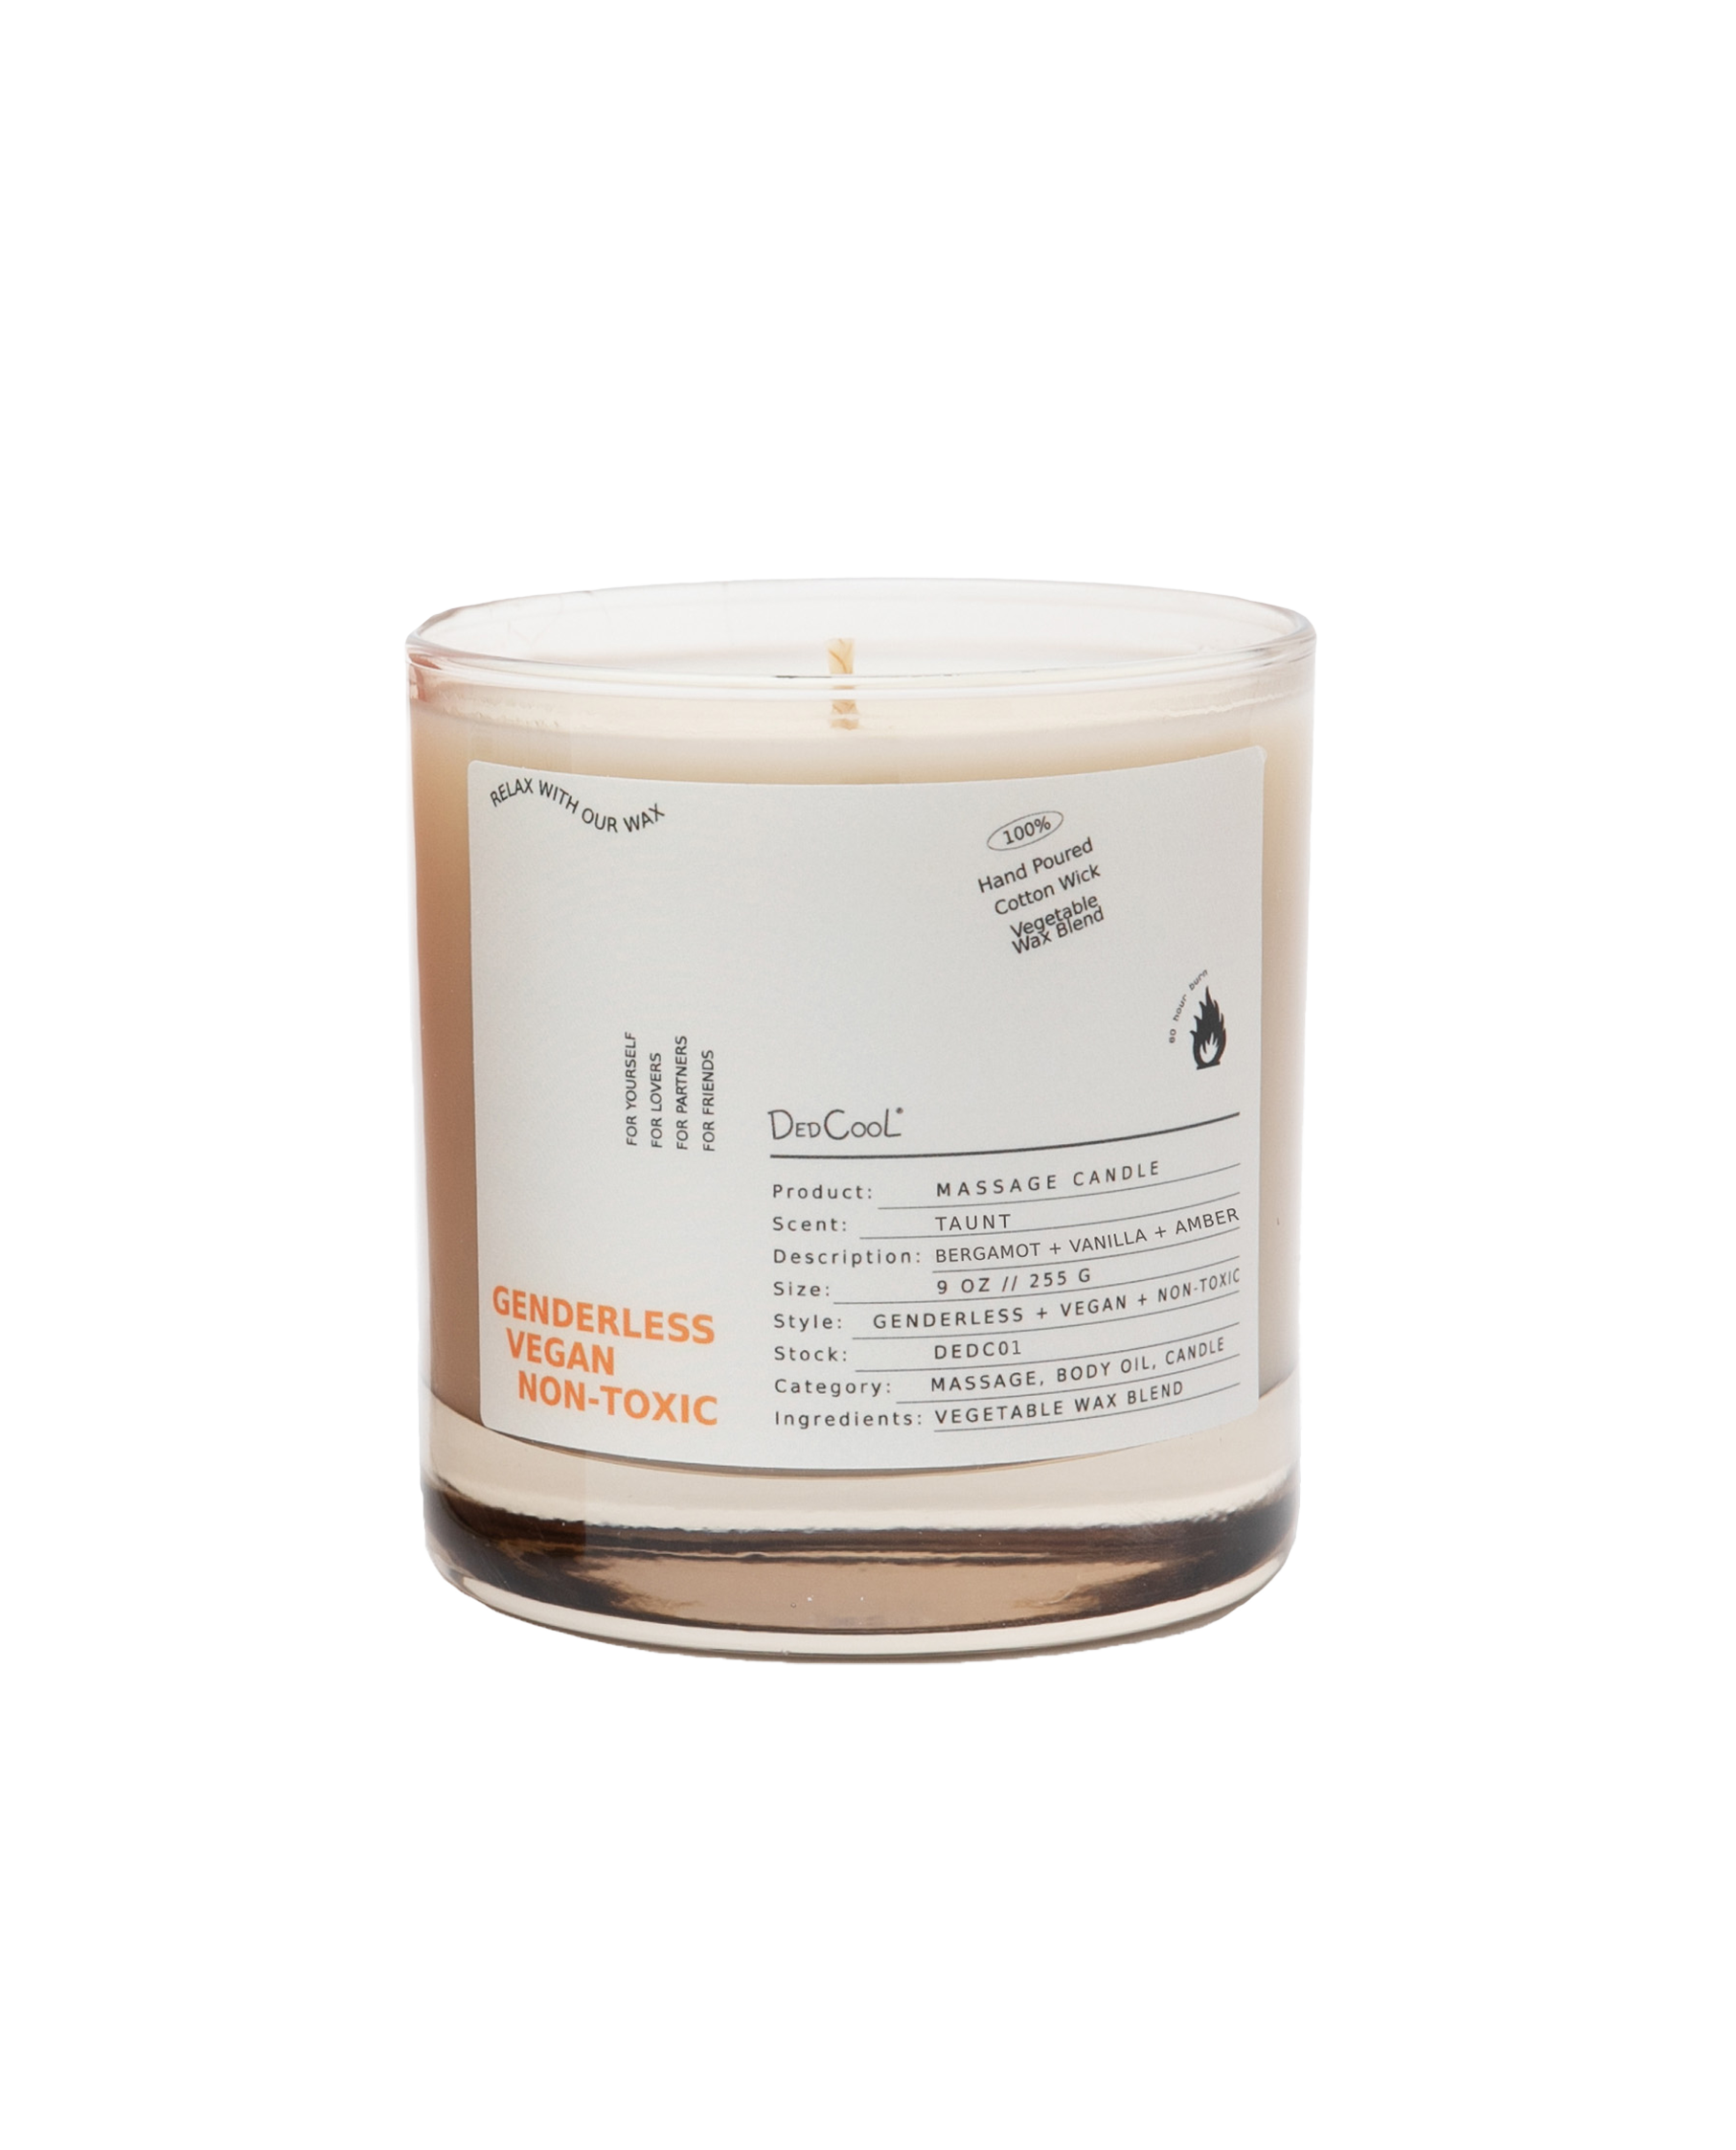 01 “Taunt” Massage Candle